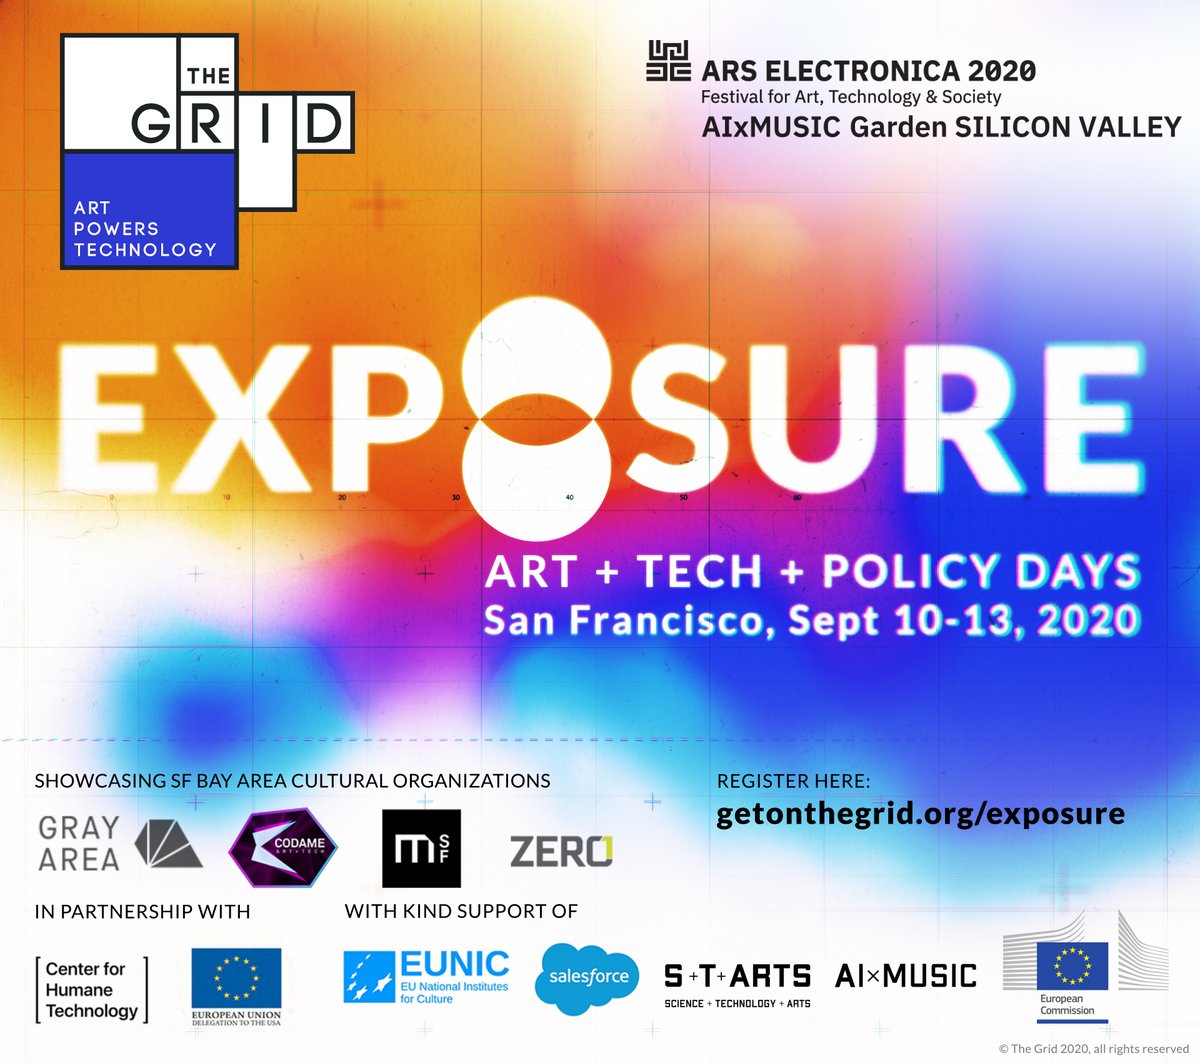 Flyer for The Grid Exposure